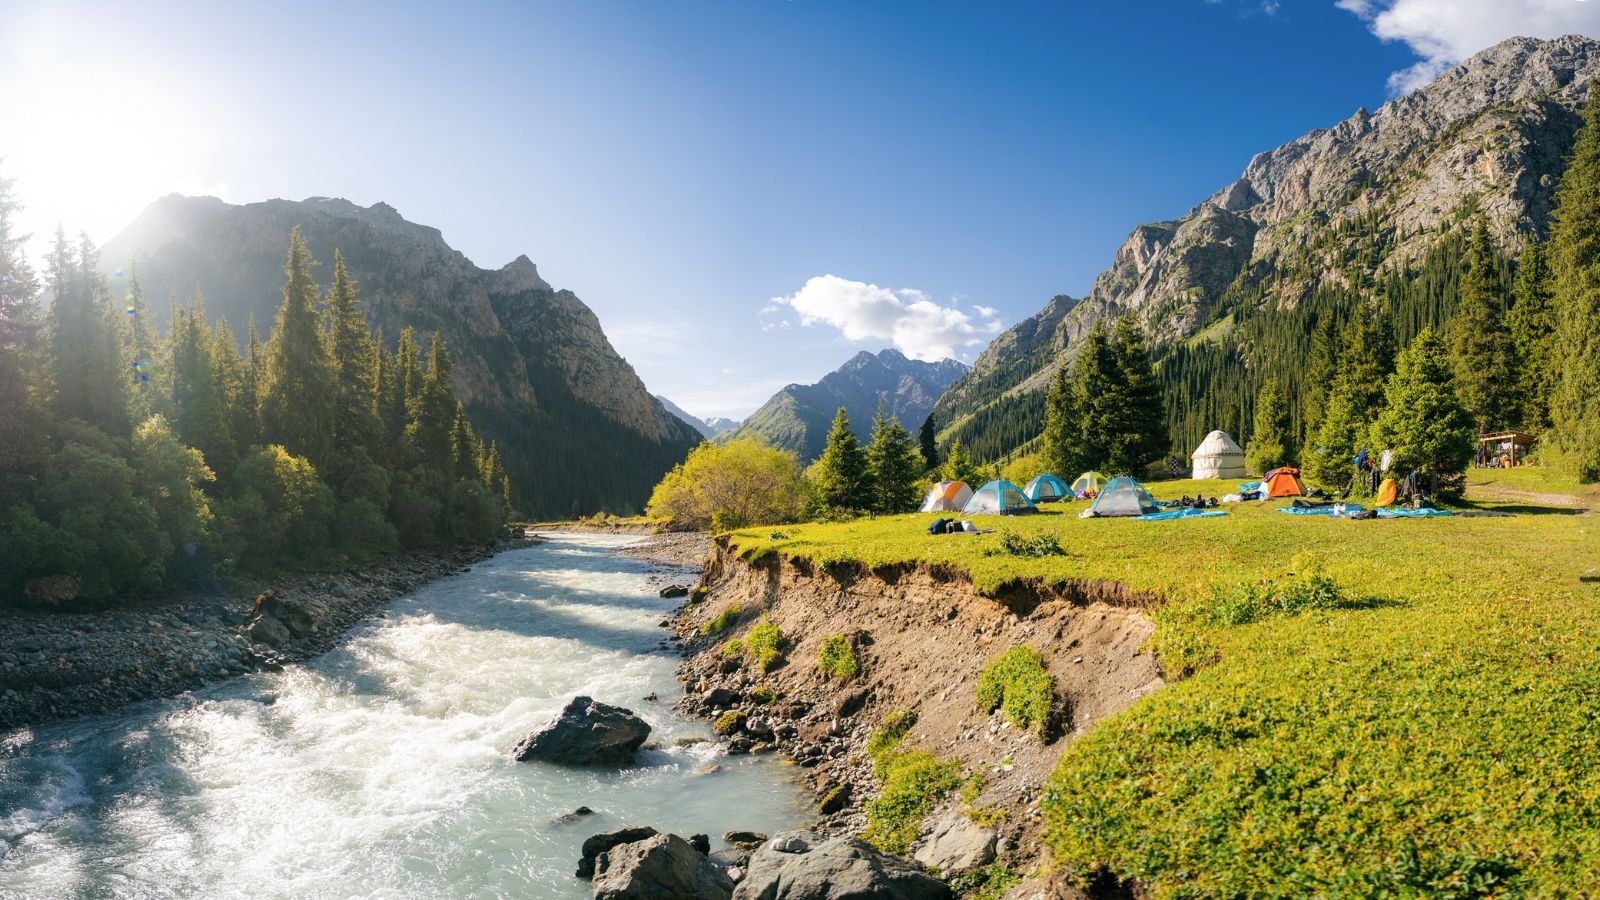 <p>Kyrgyzstan is a Central Asian republic that was once part of the Soviet Union. After the Soviet Union fell apart, Kyrgyzstan became an independent country. It is located along the ancient Silk Road, which was a famous trade route connecting Asia and Europe.</p> <p>Most of Kyrgyzstan’s land,<a href="https://www.telegraph.co.uk/travel/destinations/asia/kyrgyzstan/articles/amazing-facts-about-kyrgyzstan/" rel="noopener"> about 80%</a>, is covered by the Tian Shan Mountains. Because it has so many beautiful mountains, people often call Kyrgyzstan the “Switzerland of Central Asia,” similar to how Switzerland in Europe is known for its stunning mountain scenery.</p>